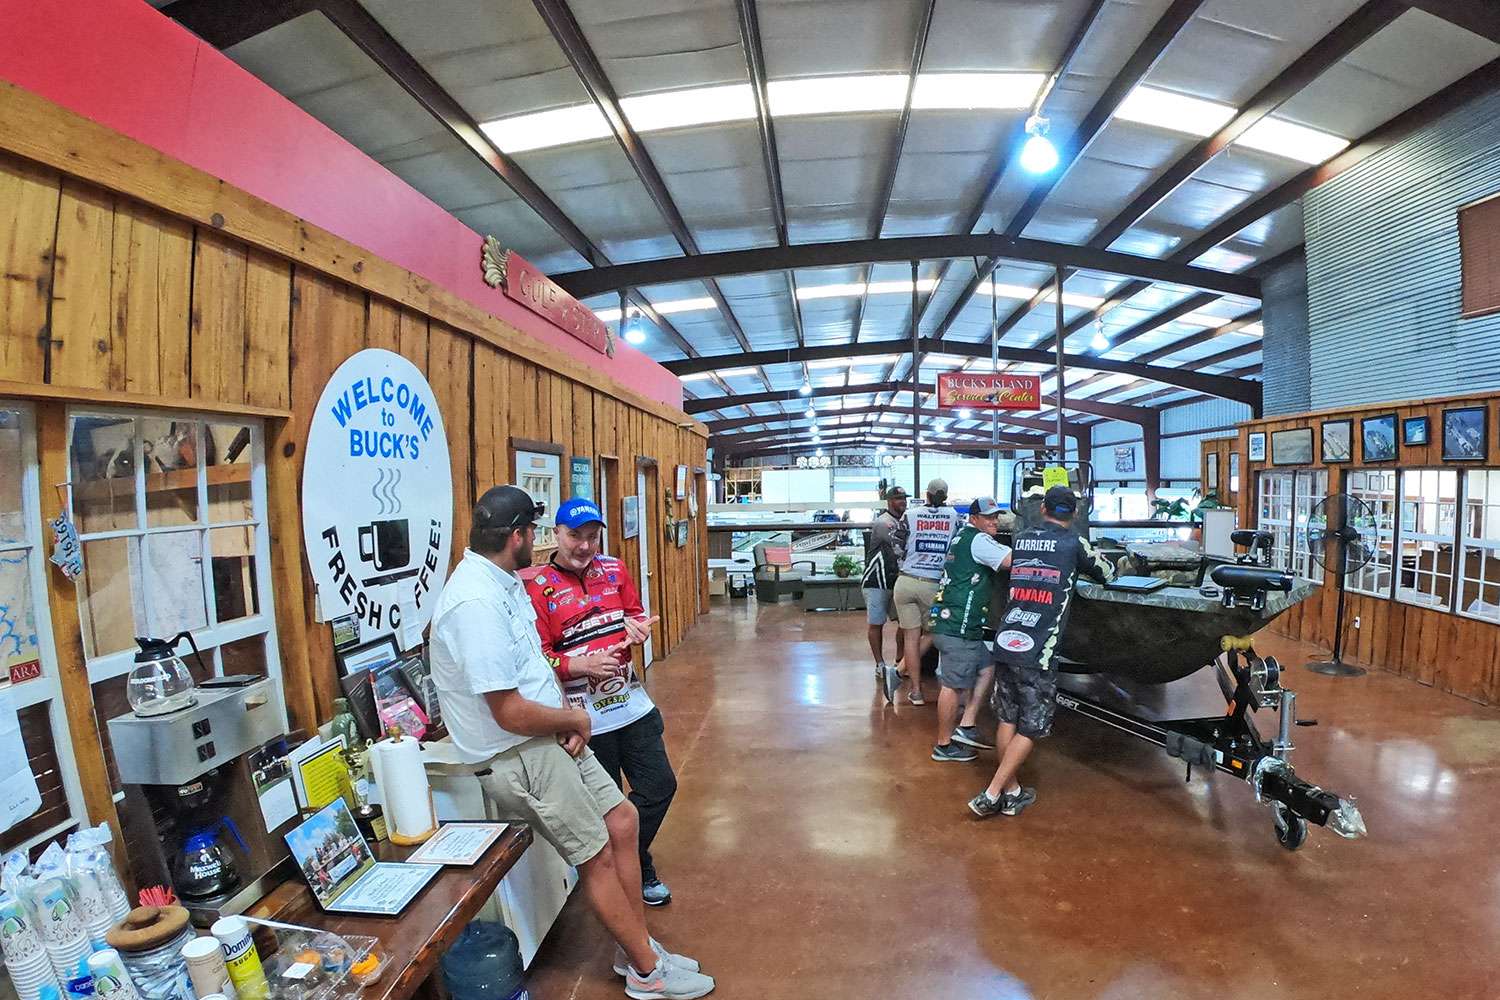 Under an hour away from Guntersville, and a day before official practice began, Buck's Island decided to make arrangements to have some of the Skeeter and Yamaha sponsored pros there to meet with fans, have their motors checked and spend some time together. 